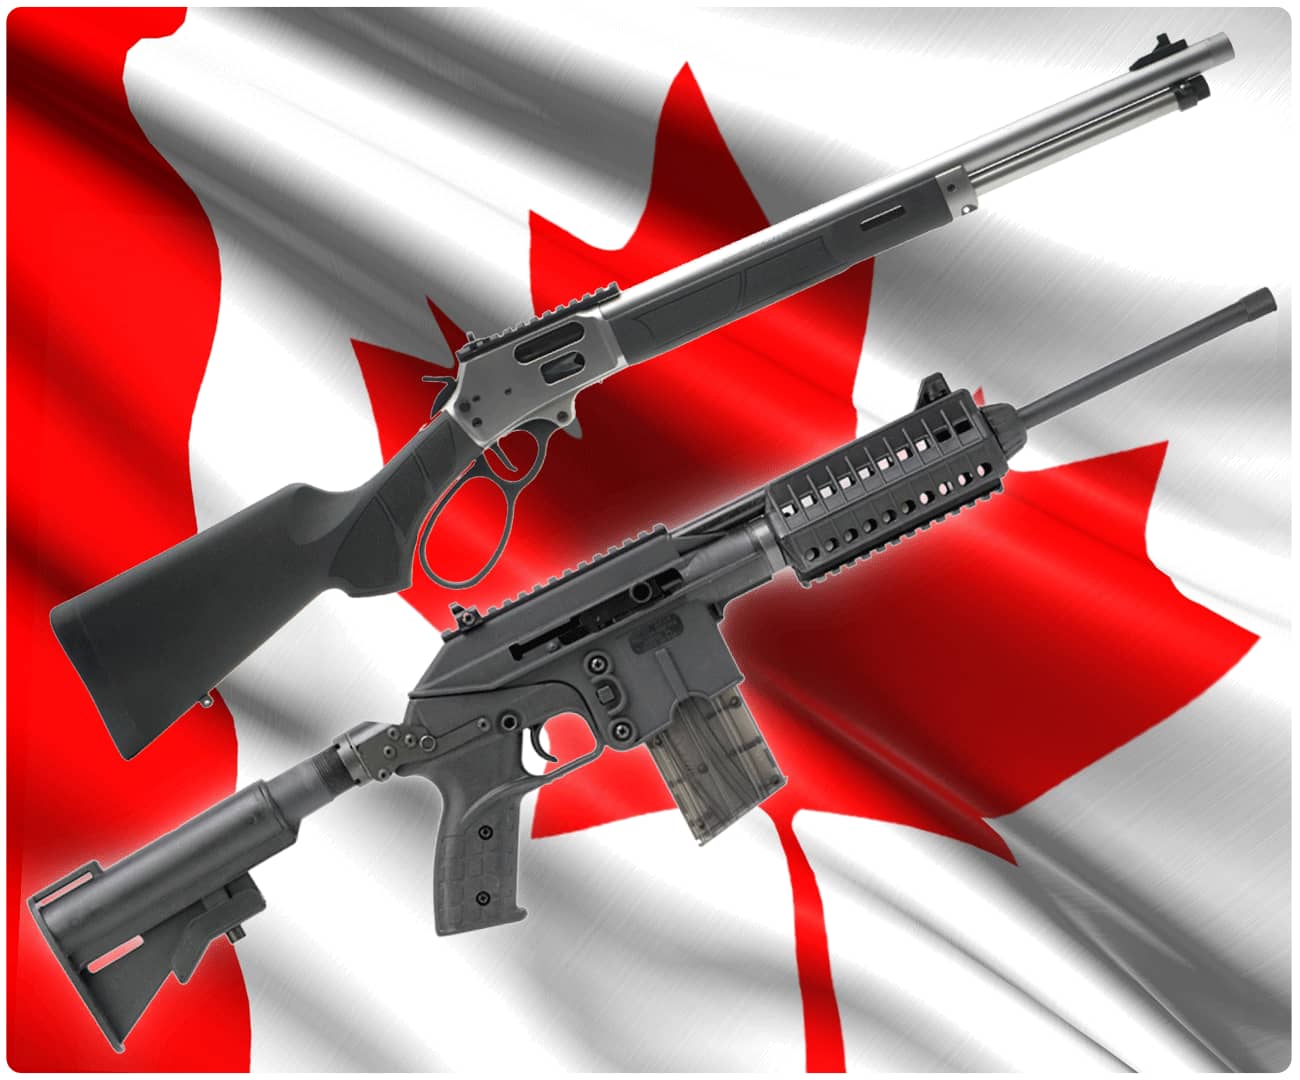 How to Buy a Gun in Canada